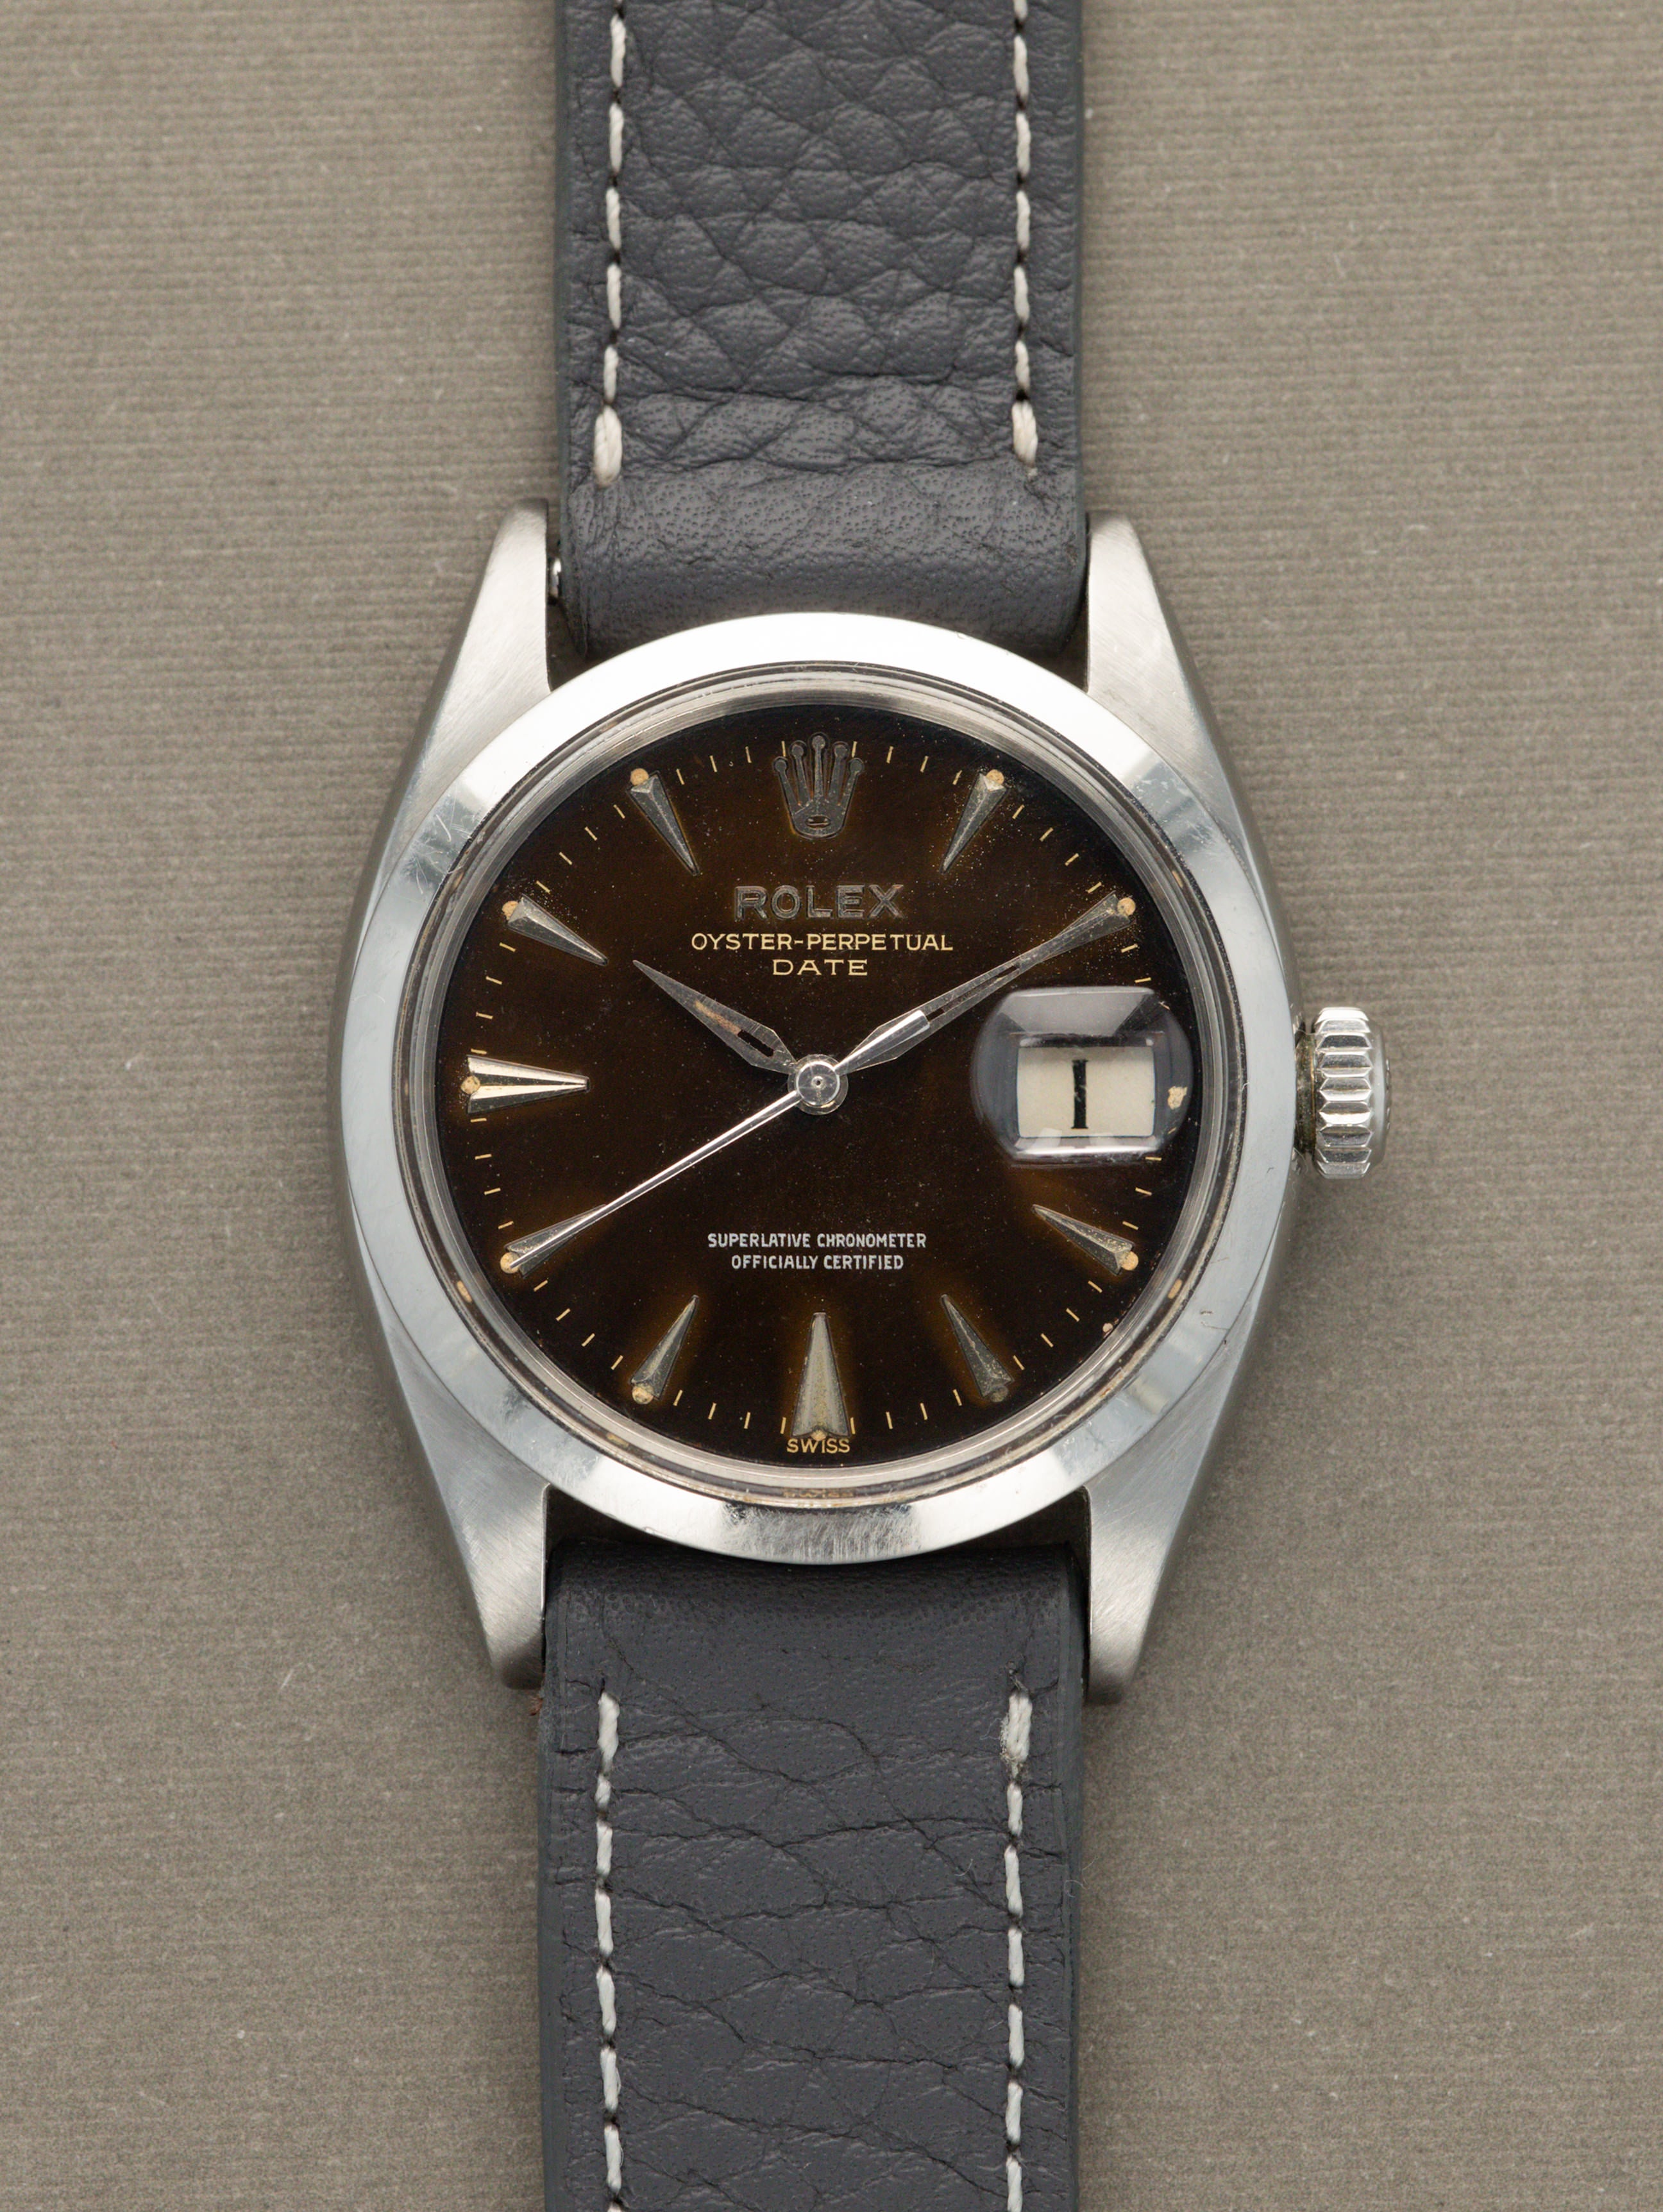 Rolex Oyster Perpetual Date Ref. 1500 - 'Tropical' Gilt Dial